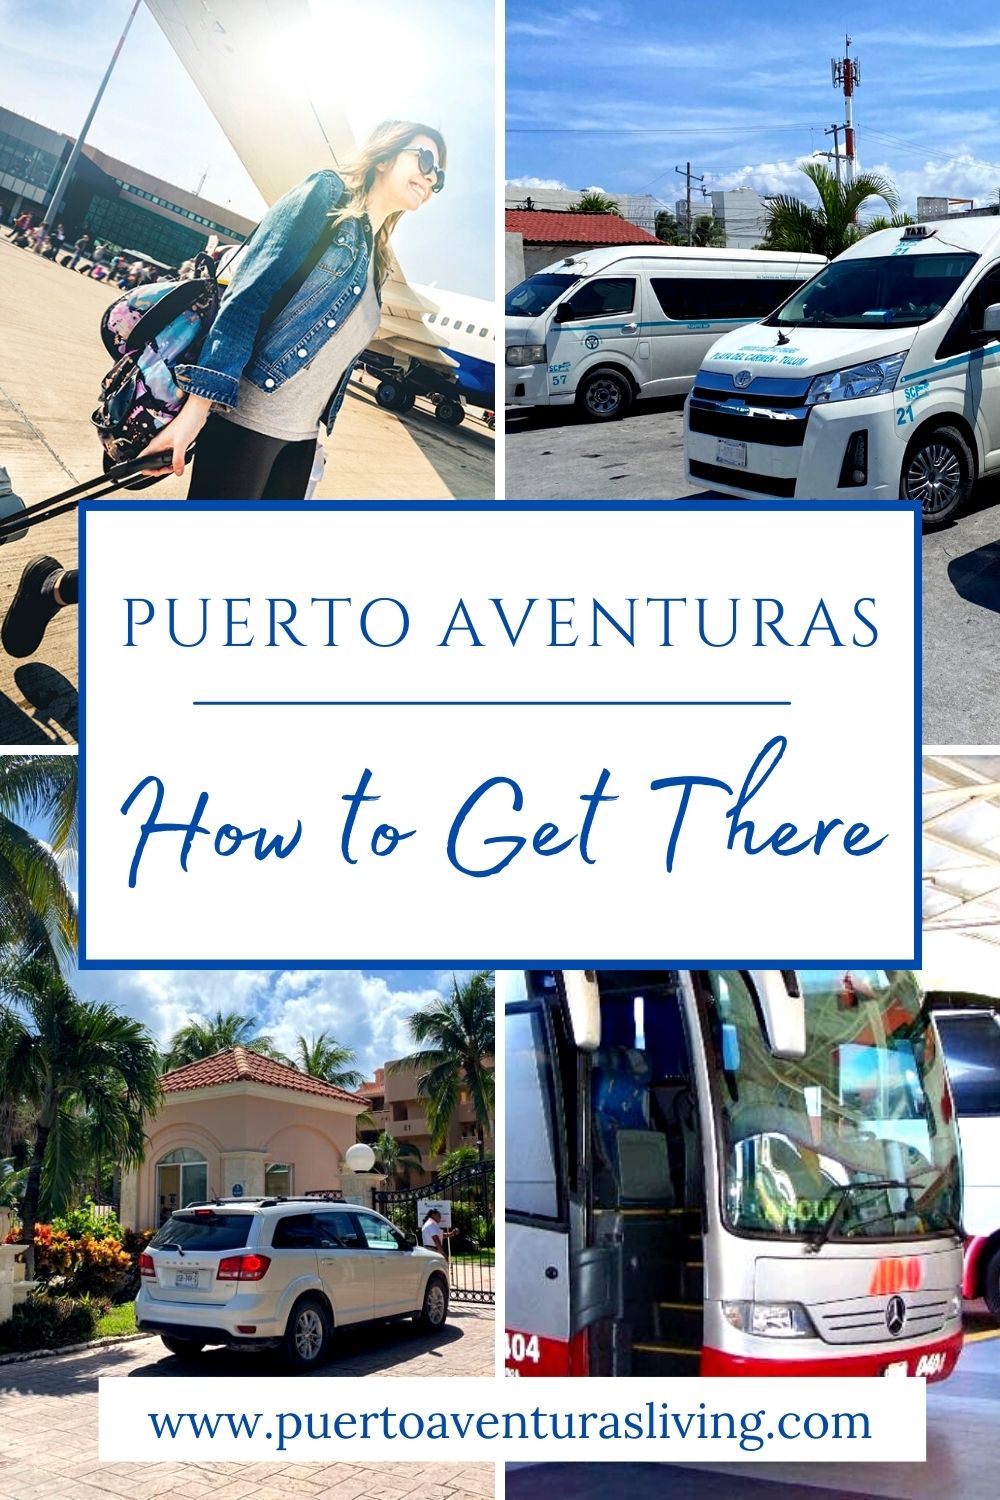 Different modes of transport to get to Puerto Aventuras